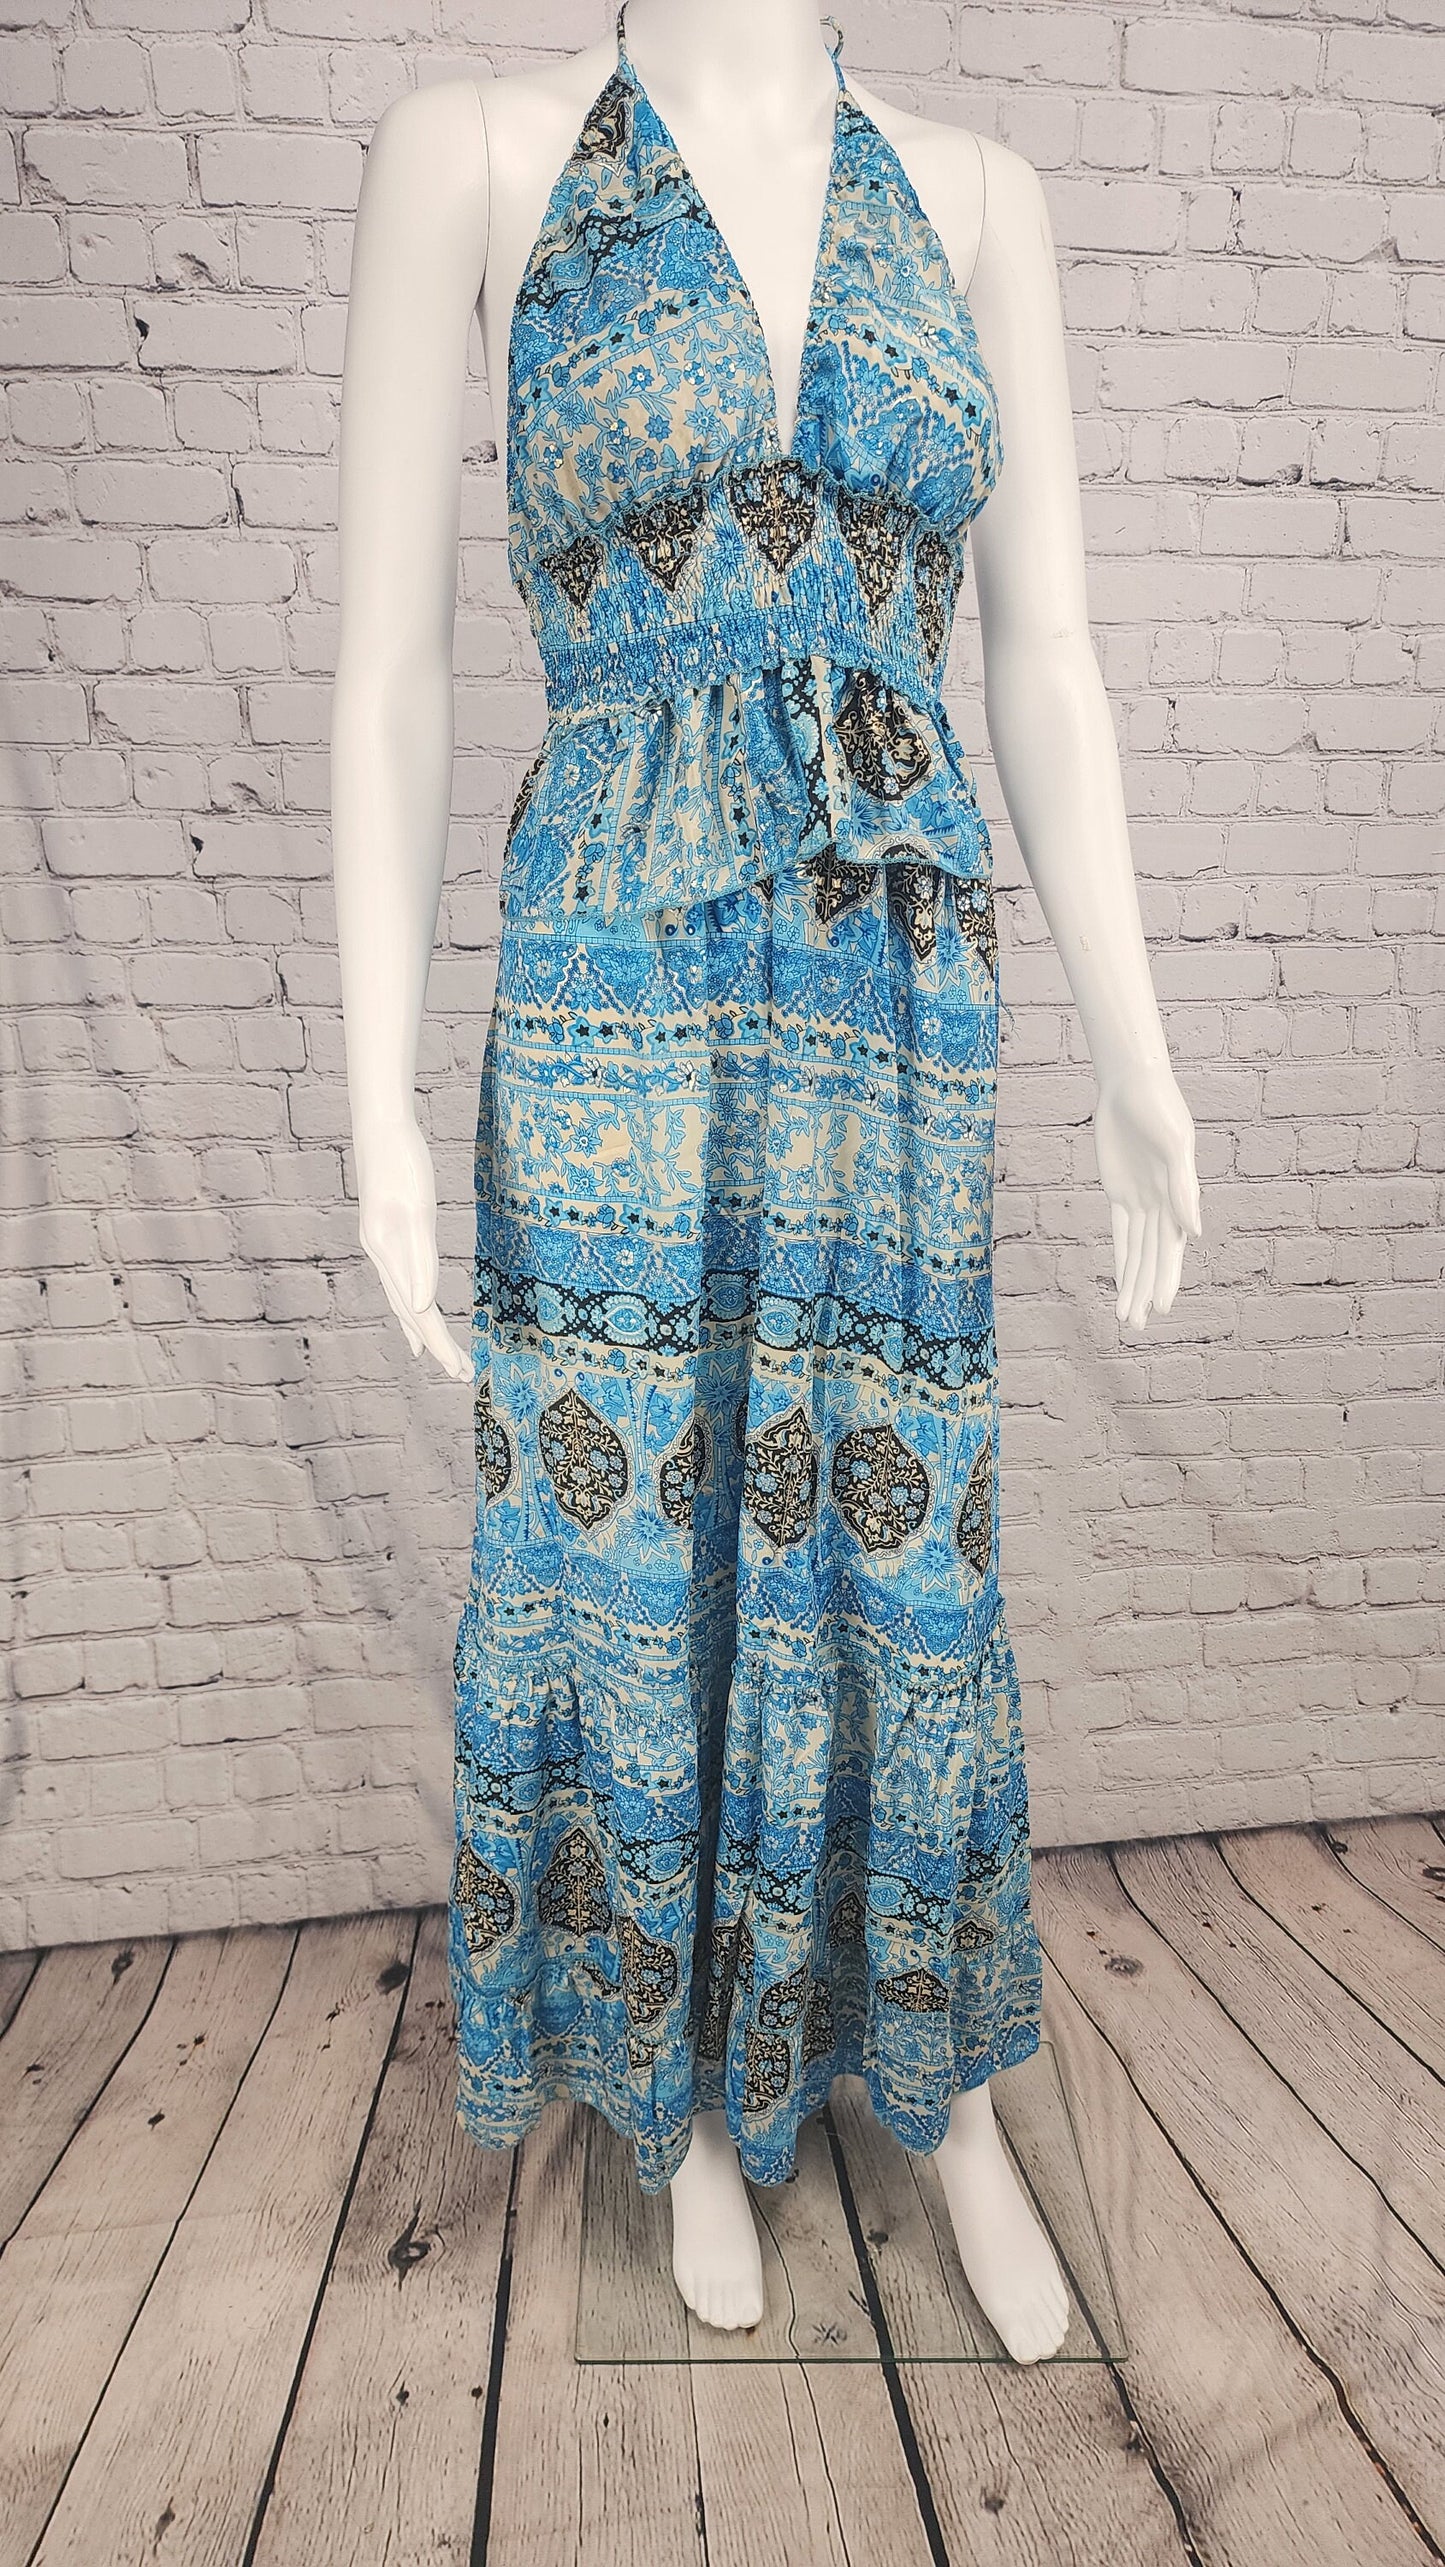 Boho dress,Bohemian Low Back Casual Maxi Dress, Long Tiered Flowy Versatile Dress, Summer Party Festival Clothes, Gypsy Dresses